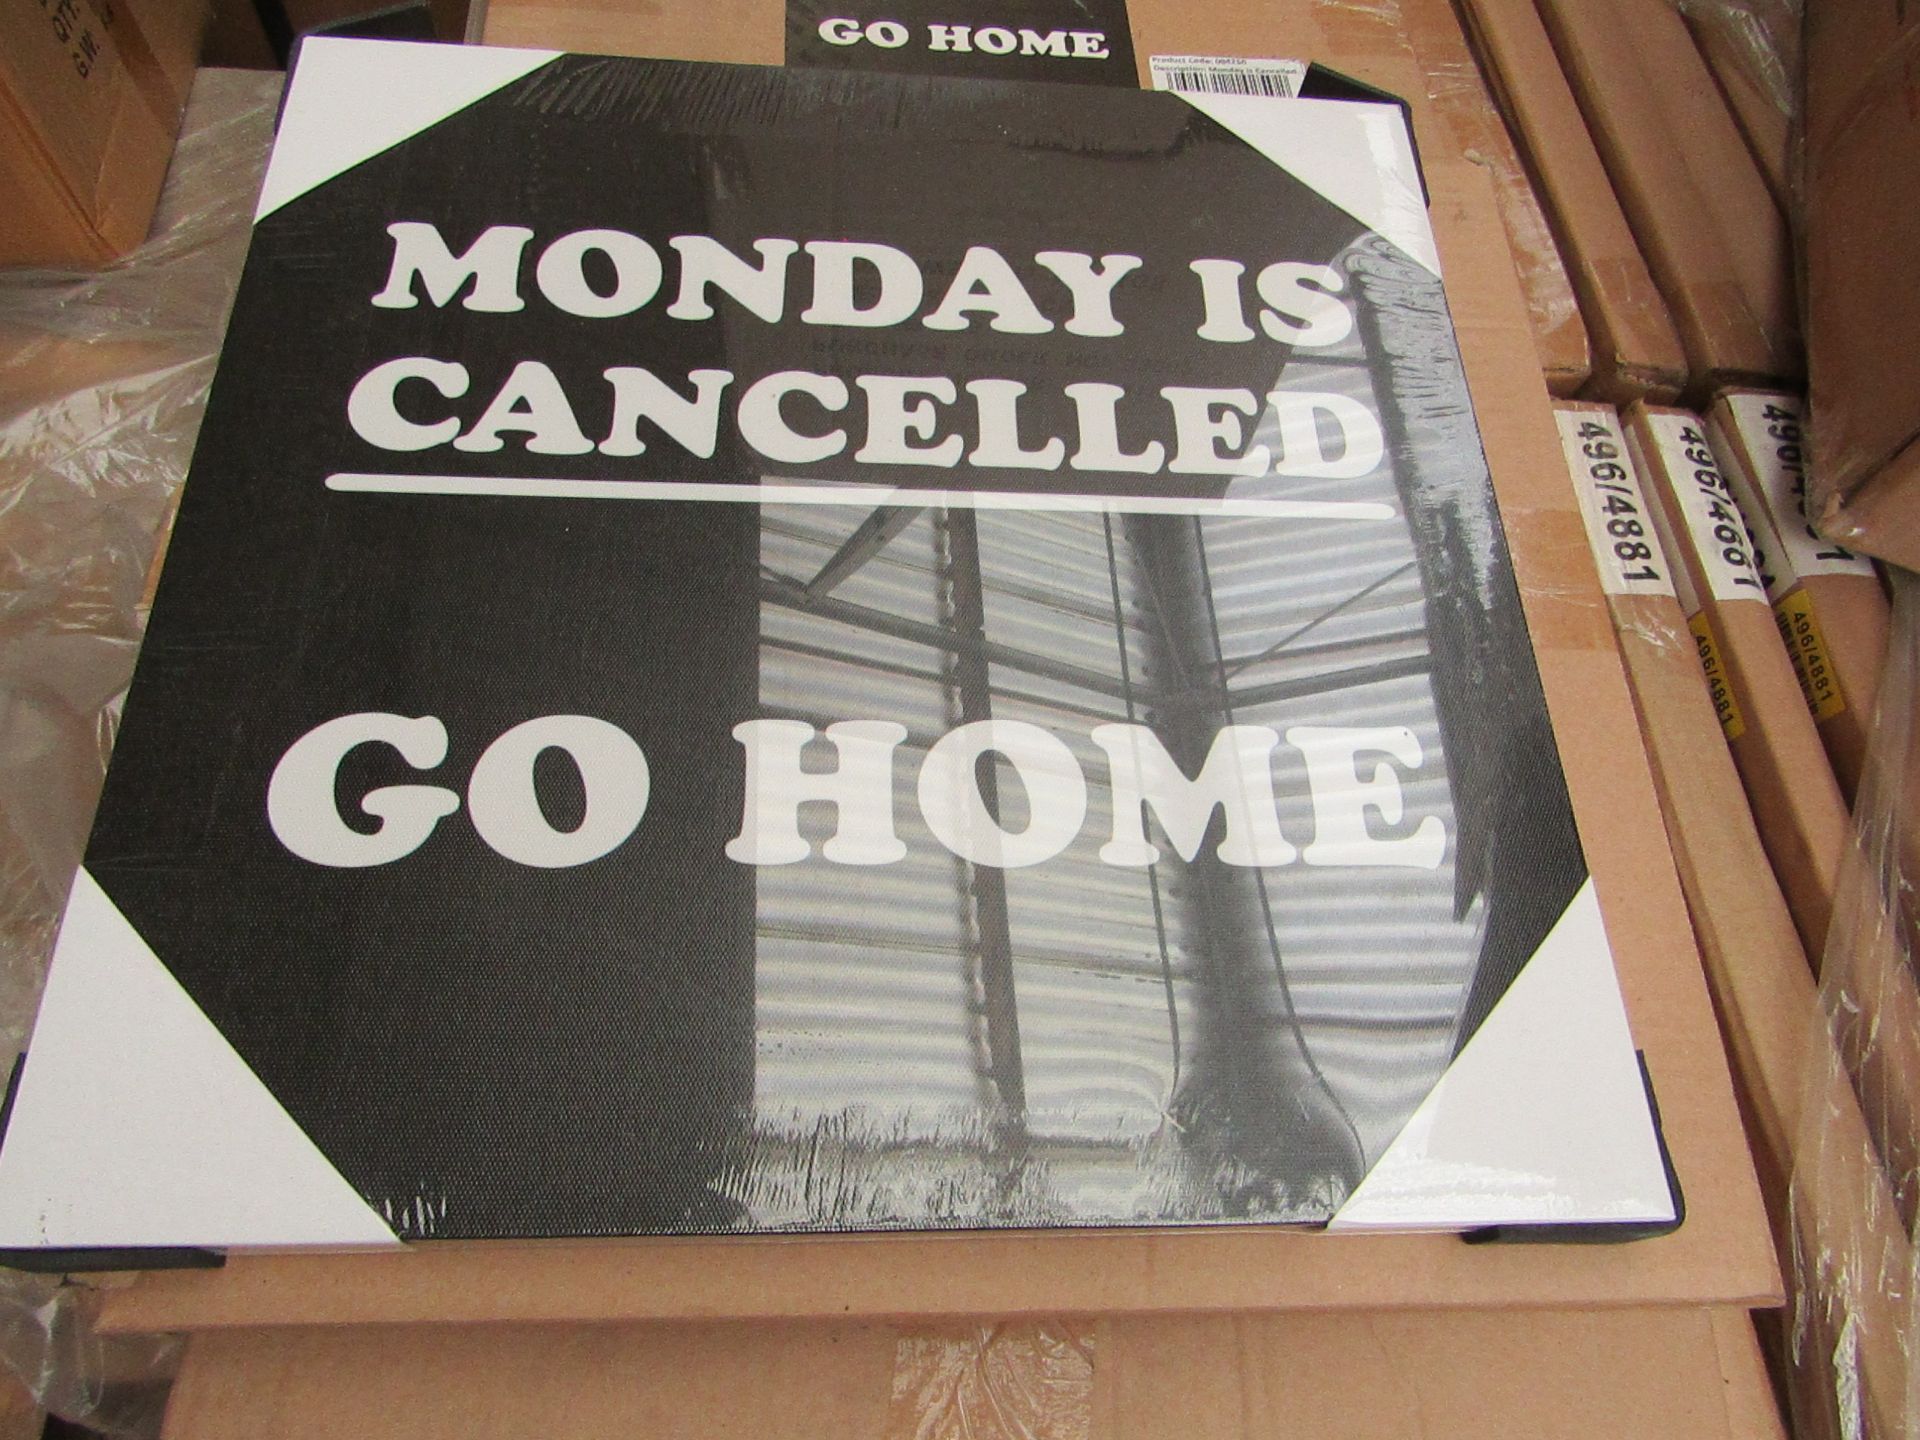 Pallet of Approx 200 Go Home Monday is cancelled Canvas wall art prints, new